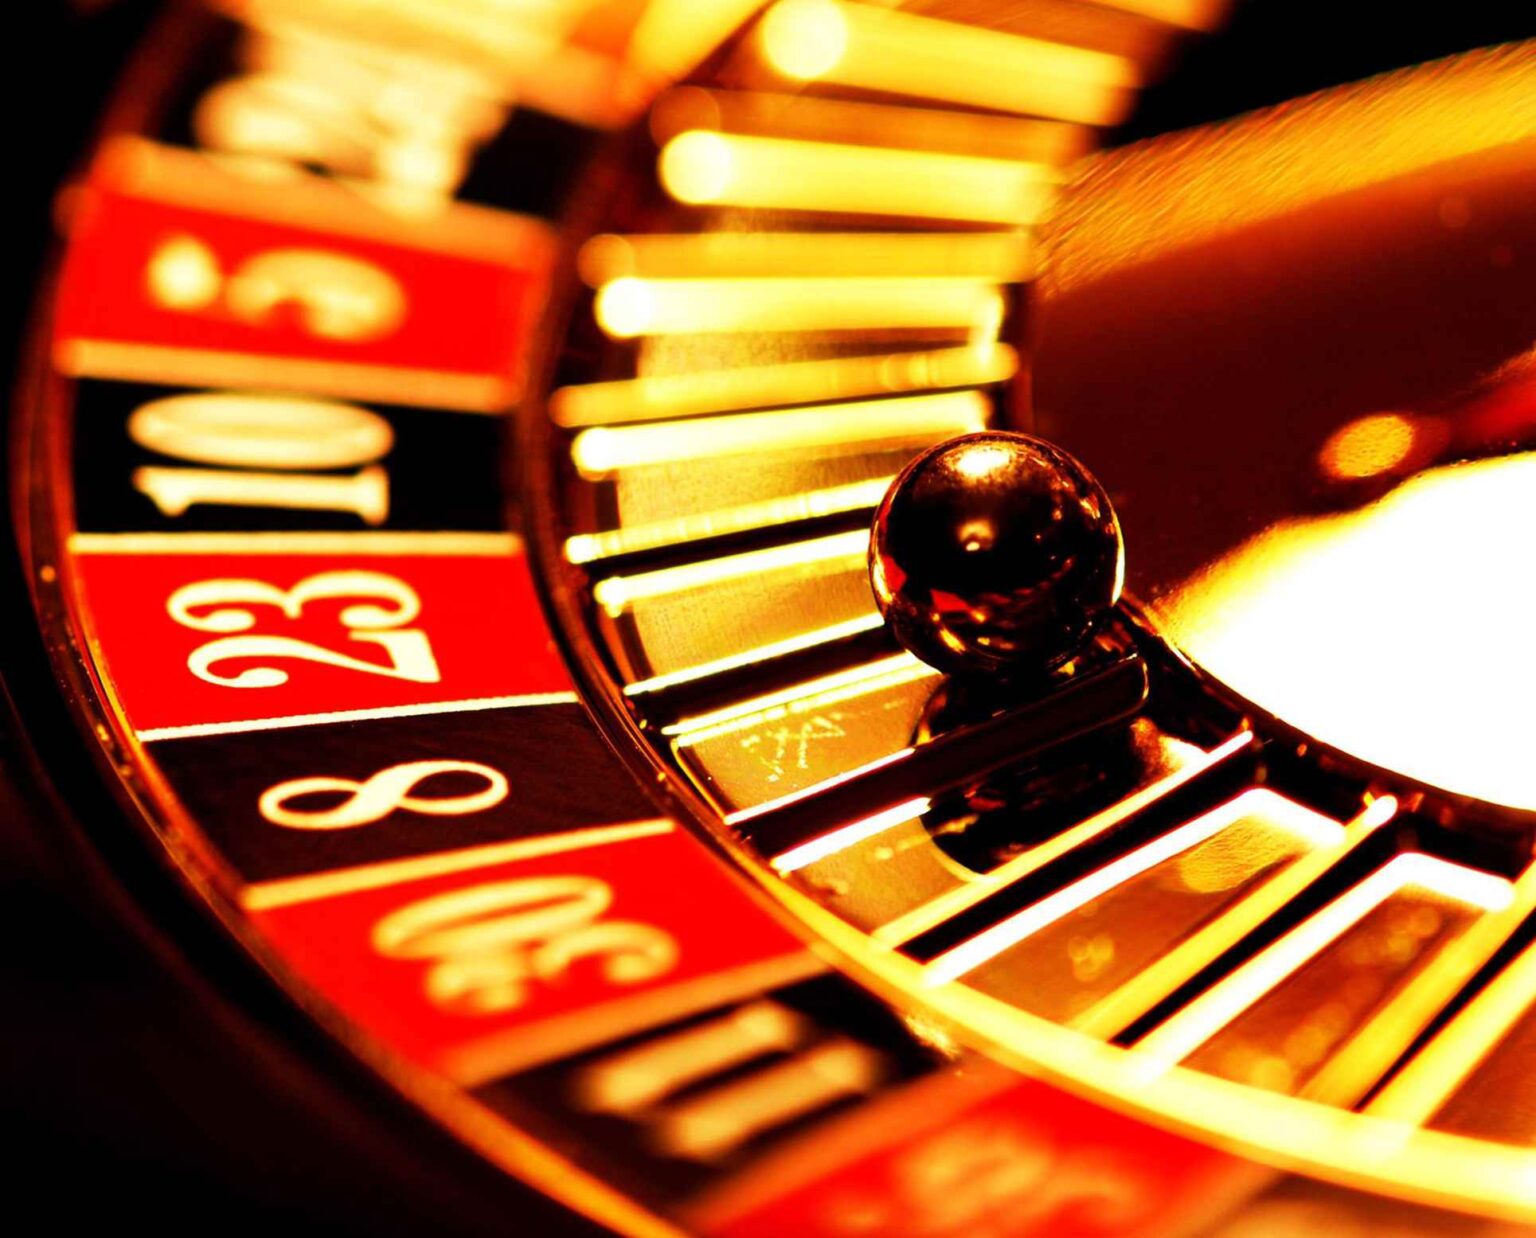 There's more that goes into successful gambling than just luck. Learn about the different casino rewards you can use to boost your winnings right here.